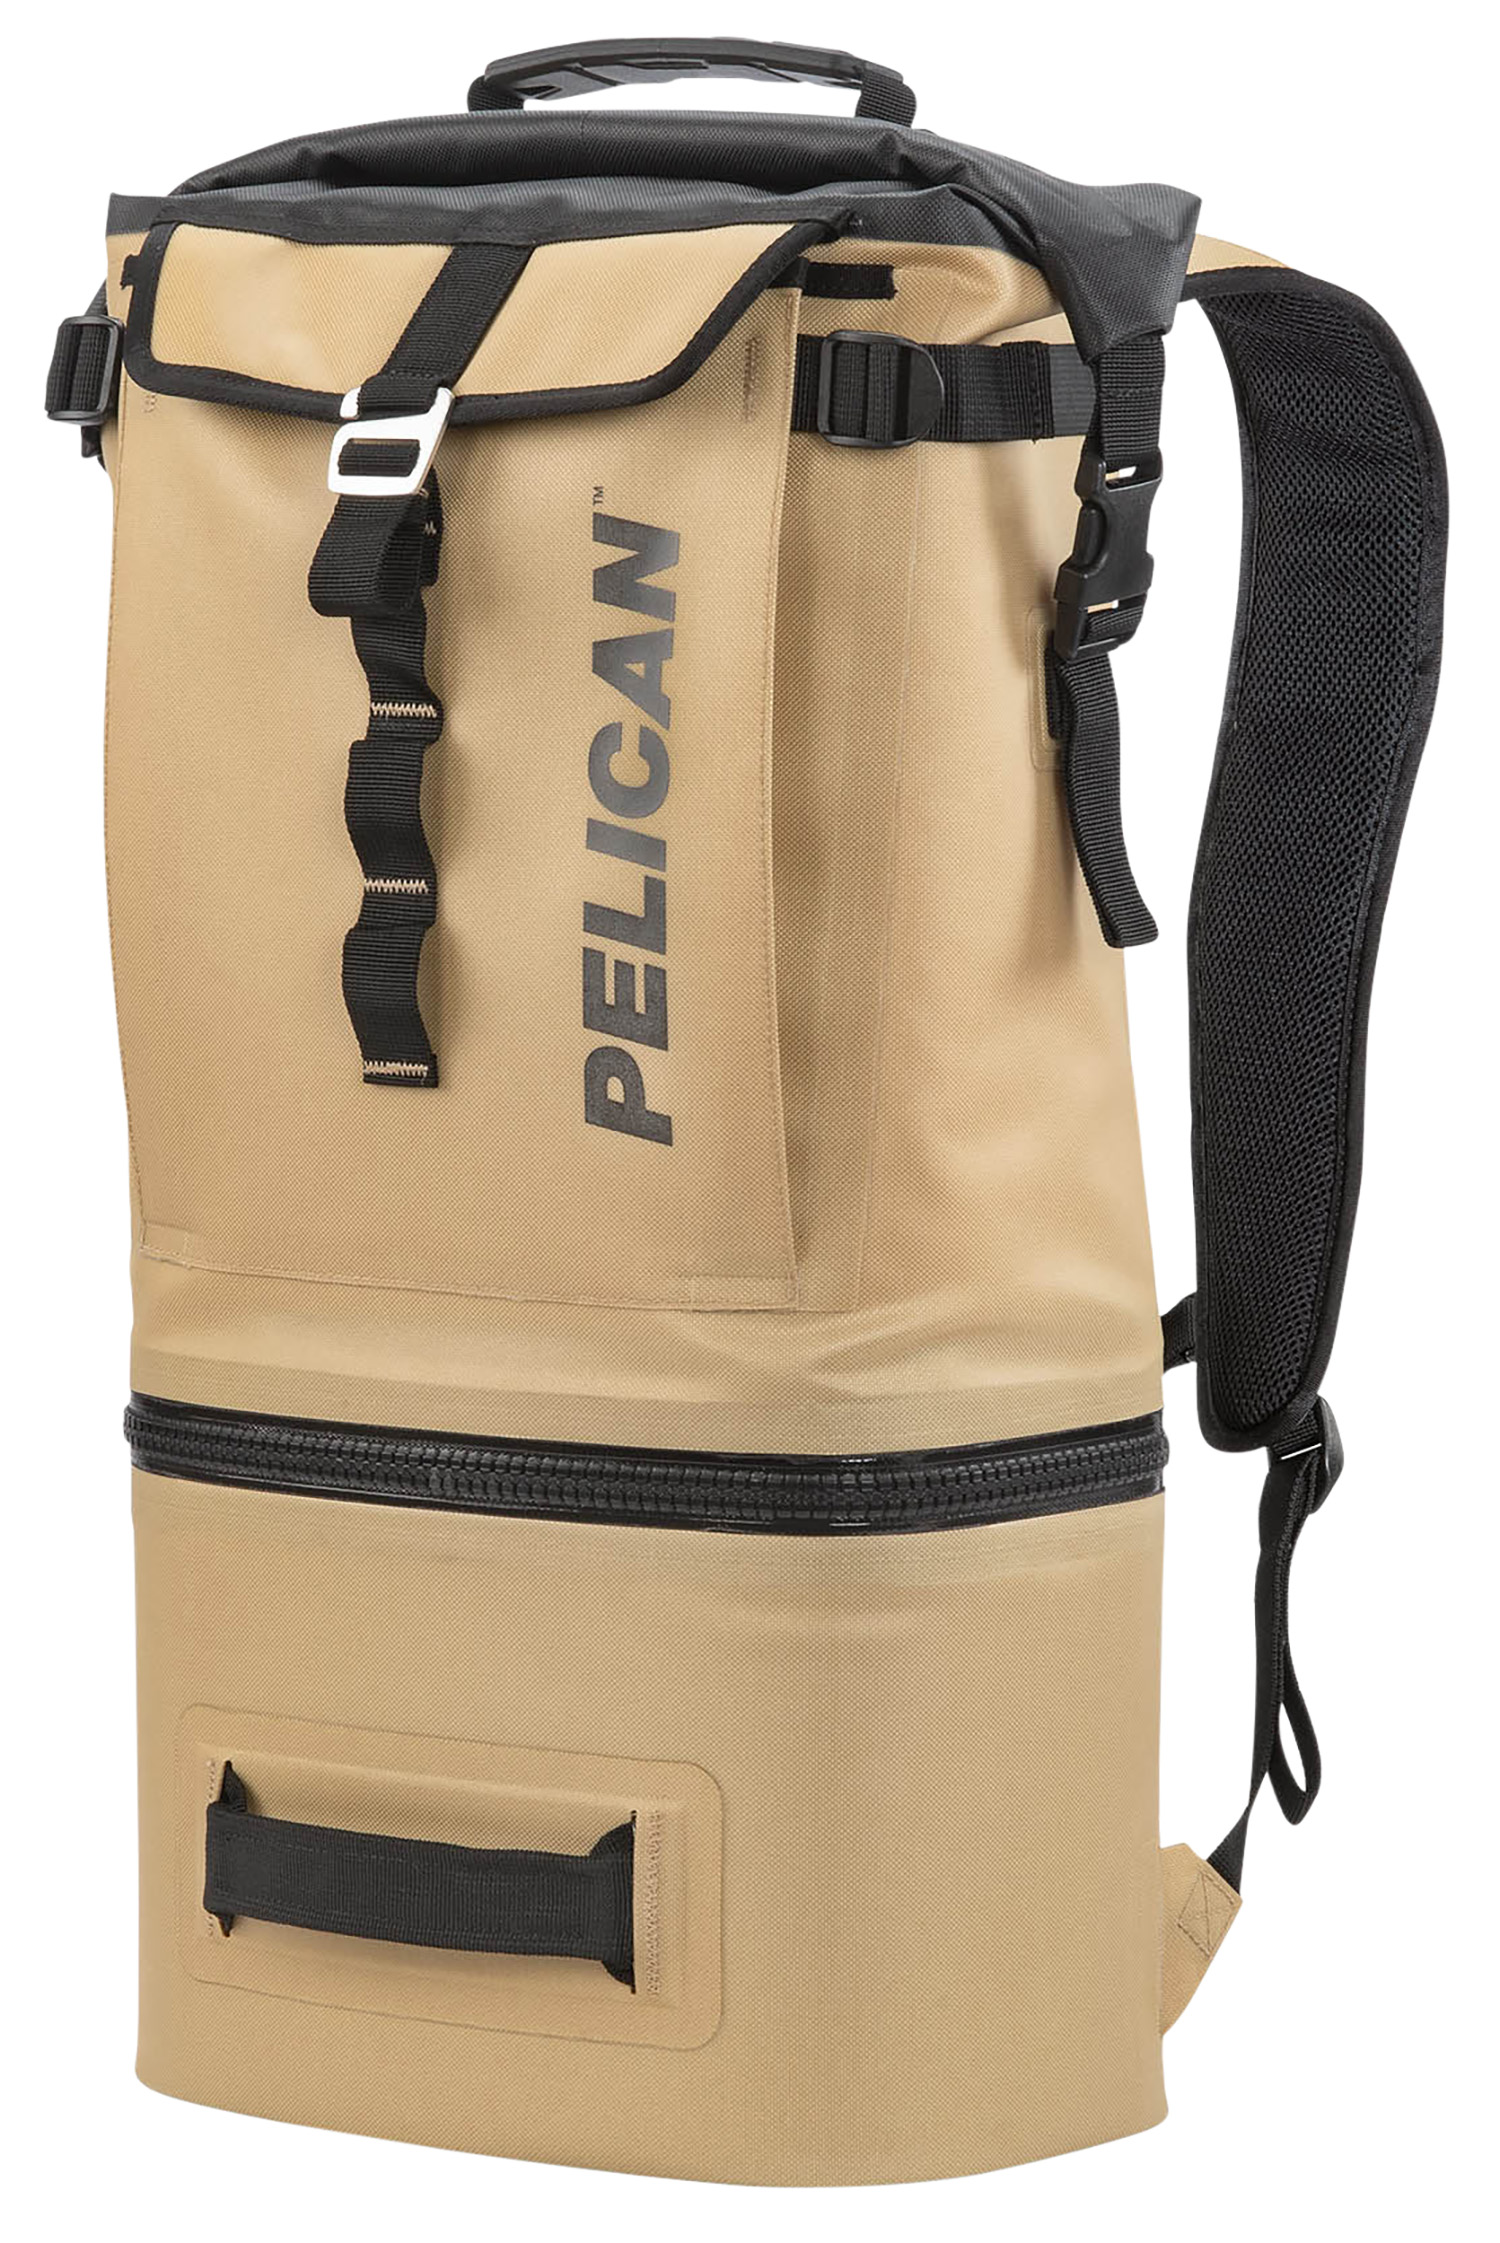 PELICAN SOFT COOLER BACKPACK COMPRESSION MOLDED COYOTE | 019428165505